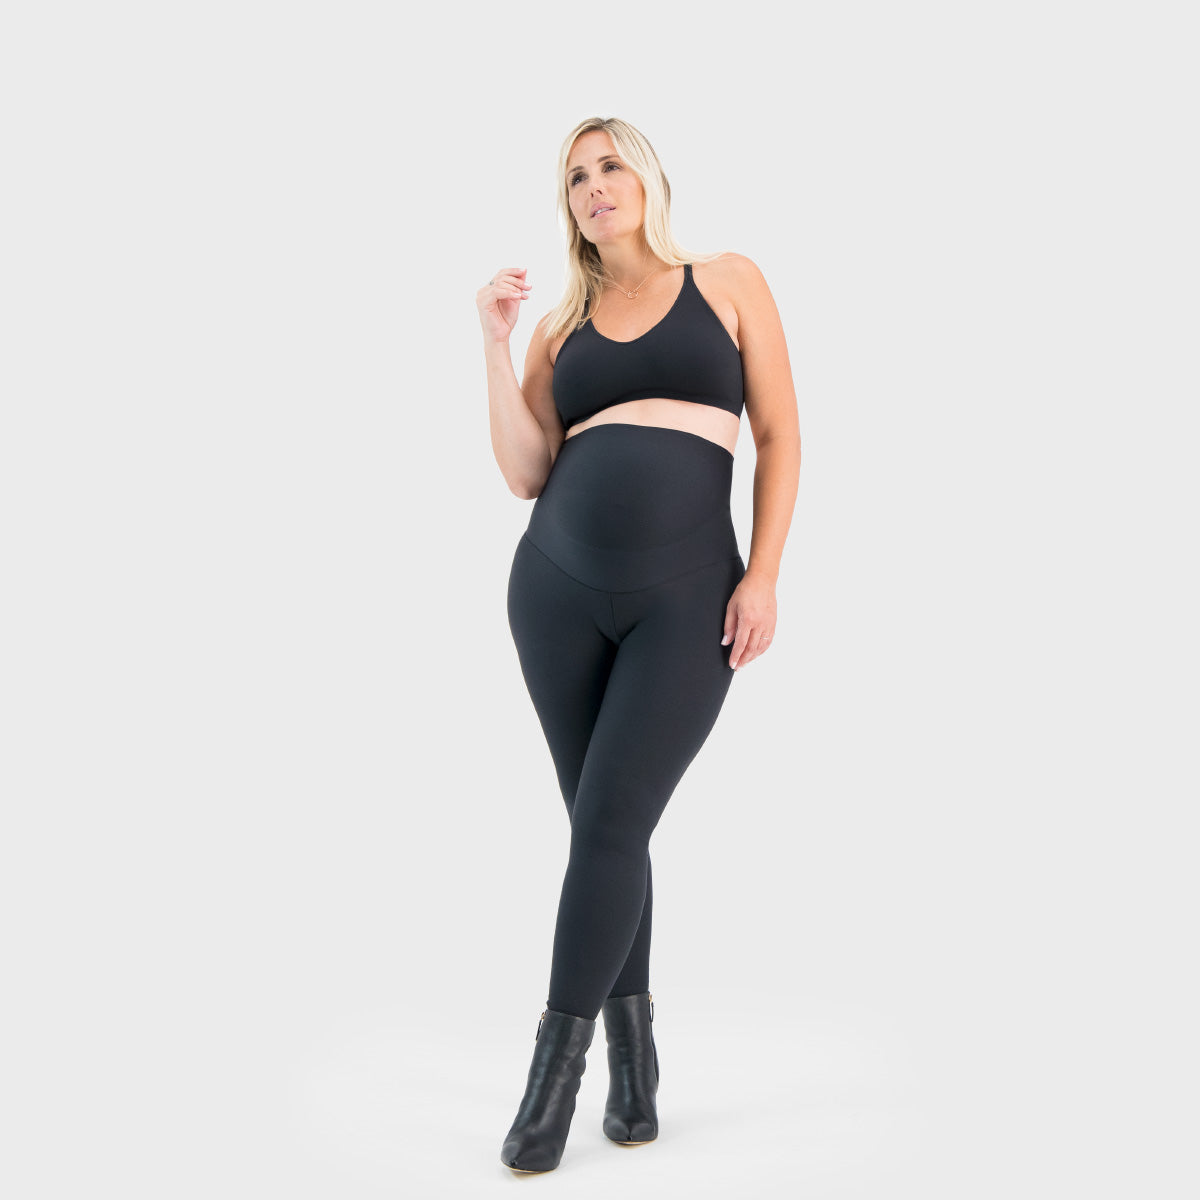 THE LORENA Maternity Support Leggings  Support leggings, Beautiful leggings,  Maternity support